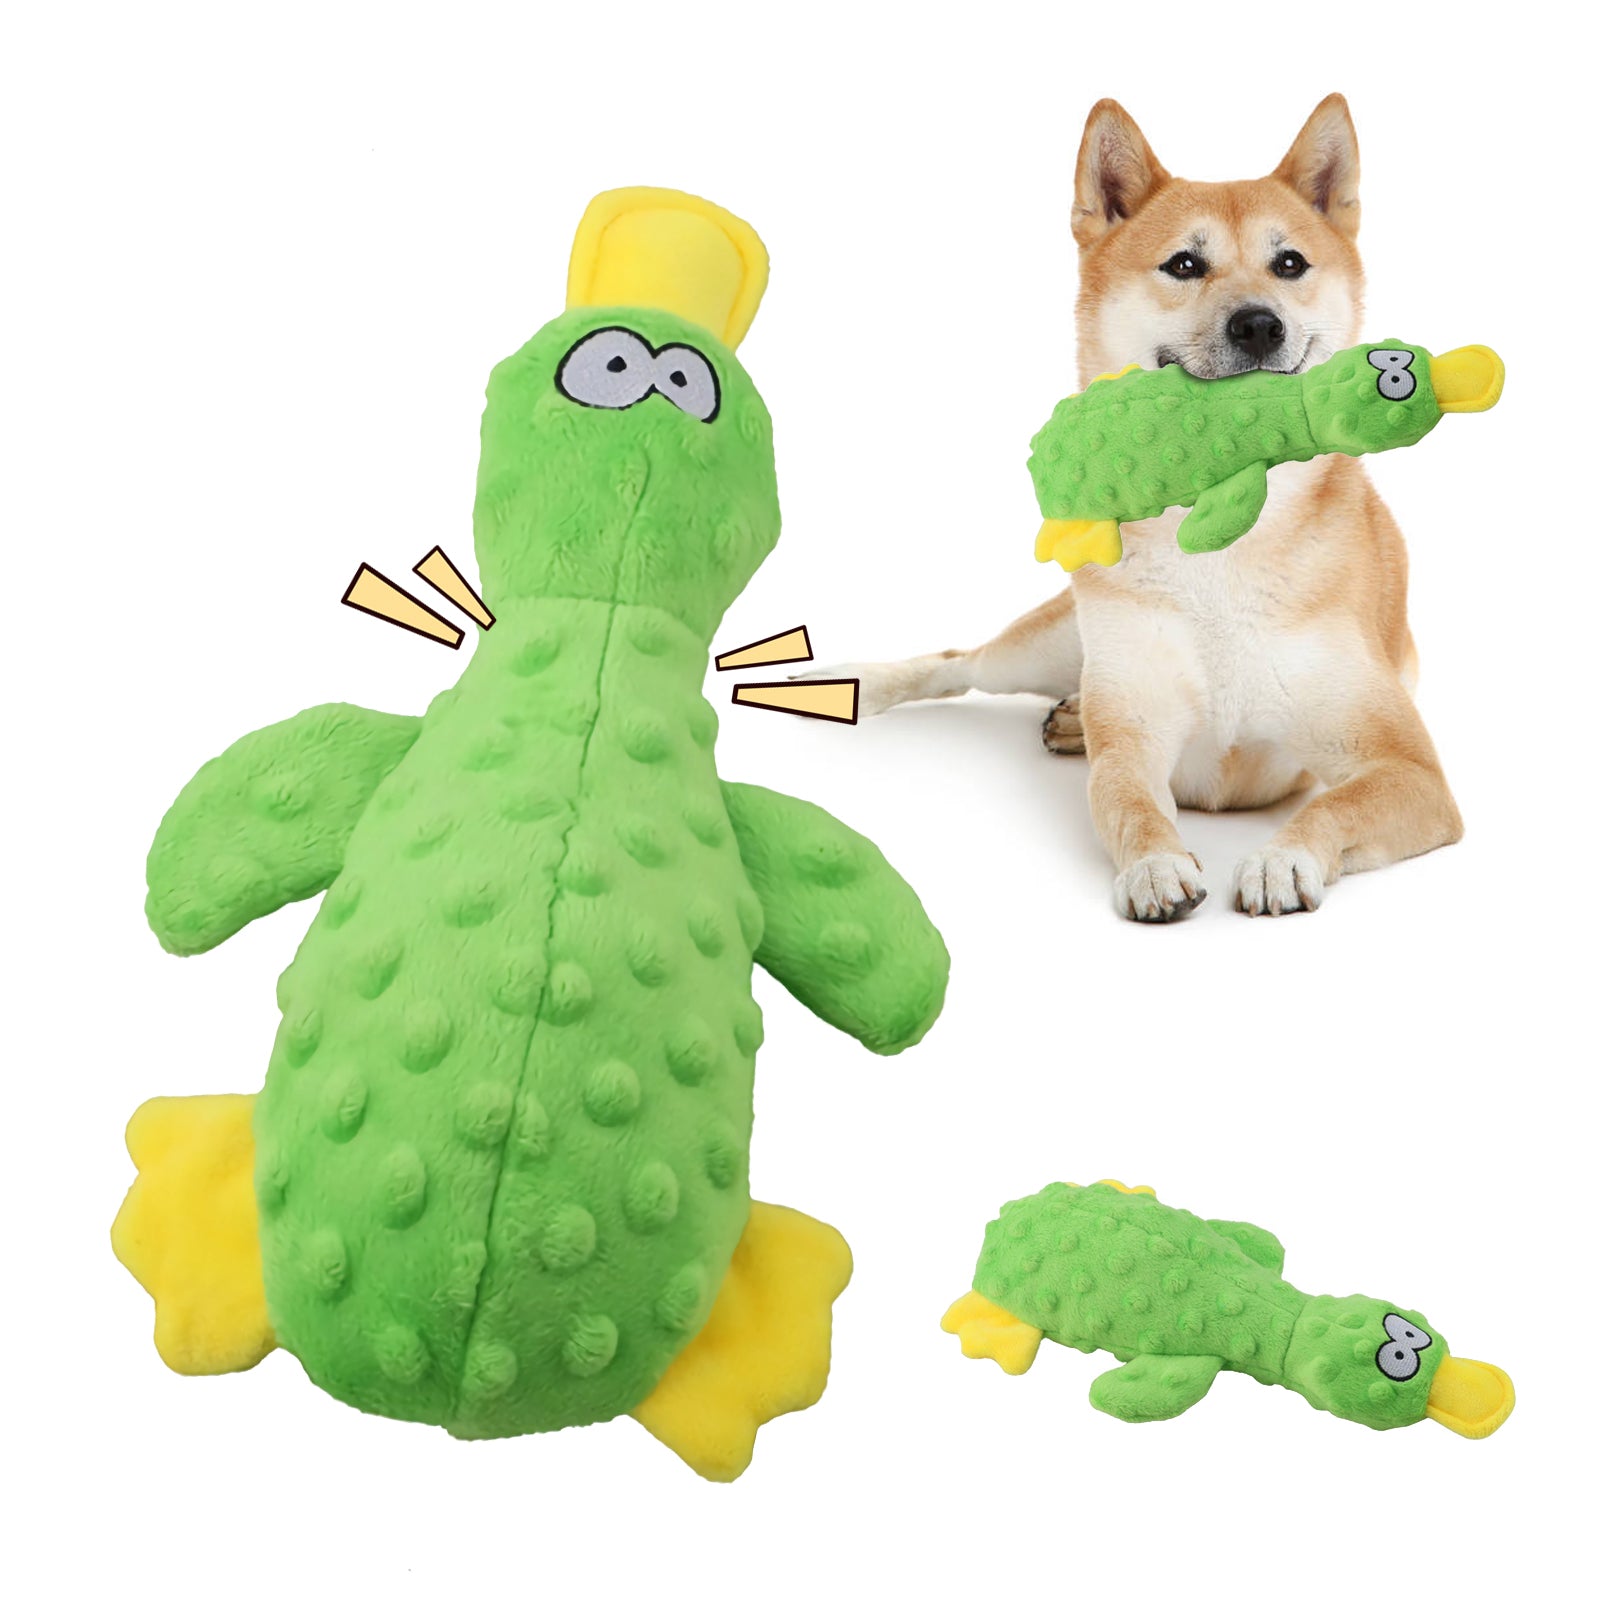 Best Pet Supplies-Cute Plush Duck Sound Toy with Soft，Durable Fabric for Small,Medium,and Large Pets.Pets Stuffed Animals Chew Toy for Biting Training Teething Indoor Pet Interactive Toy